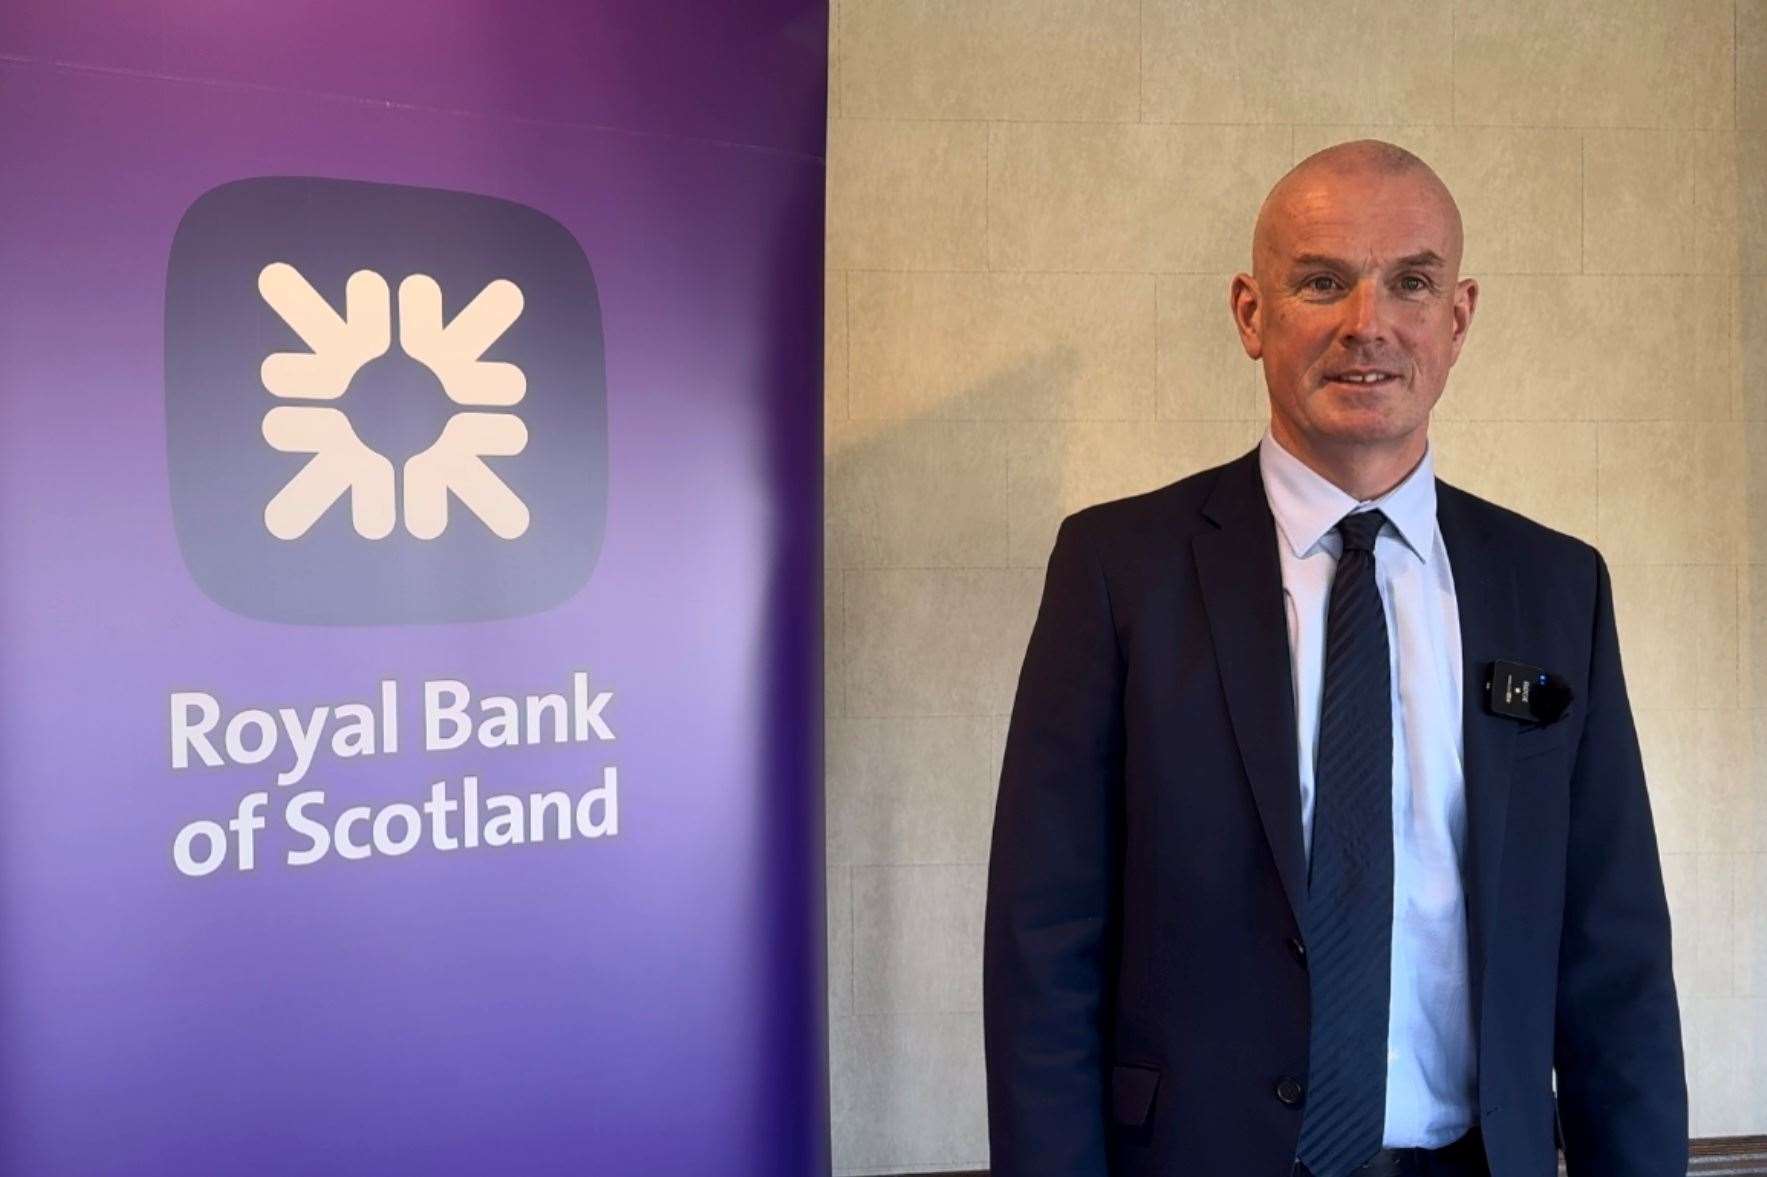 Director of business banking at the Royal Bank of Scotland, Garry Munro.